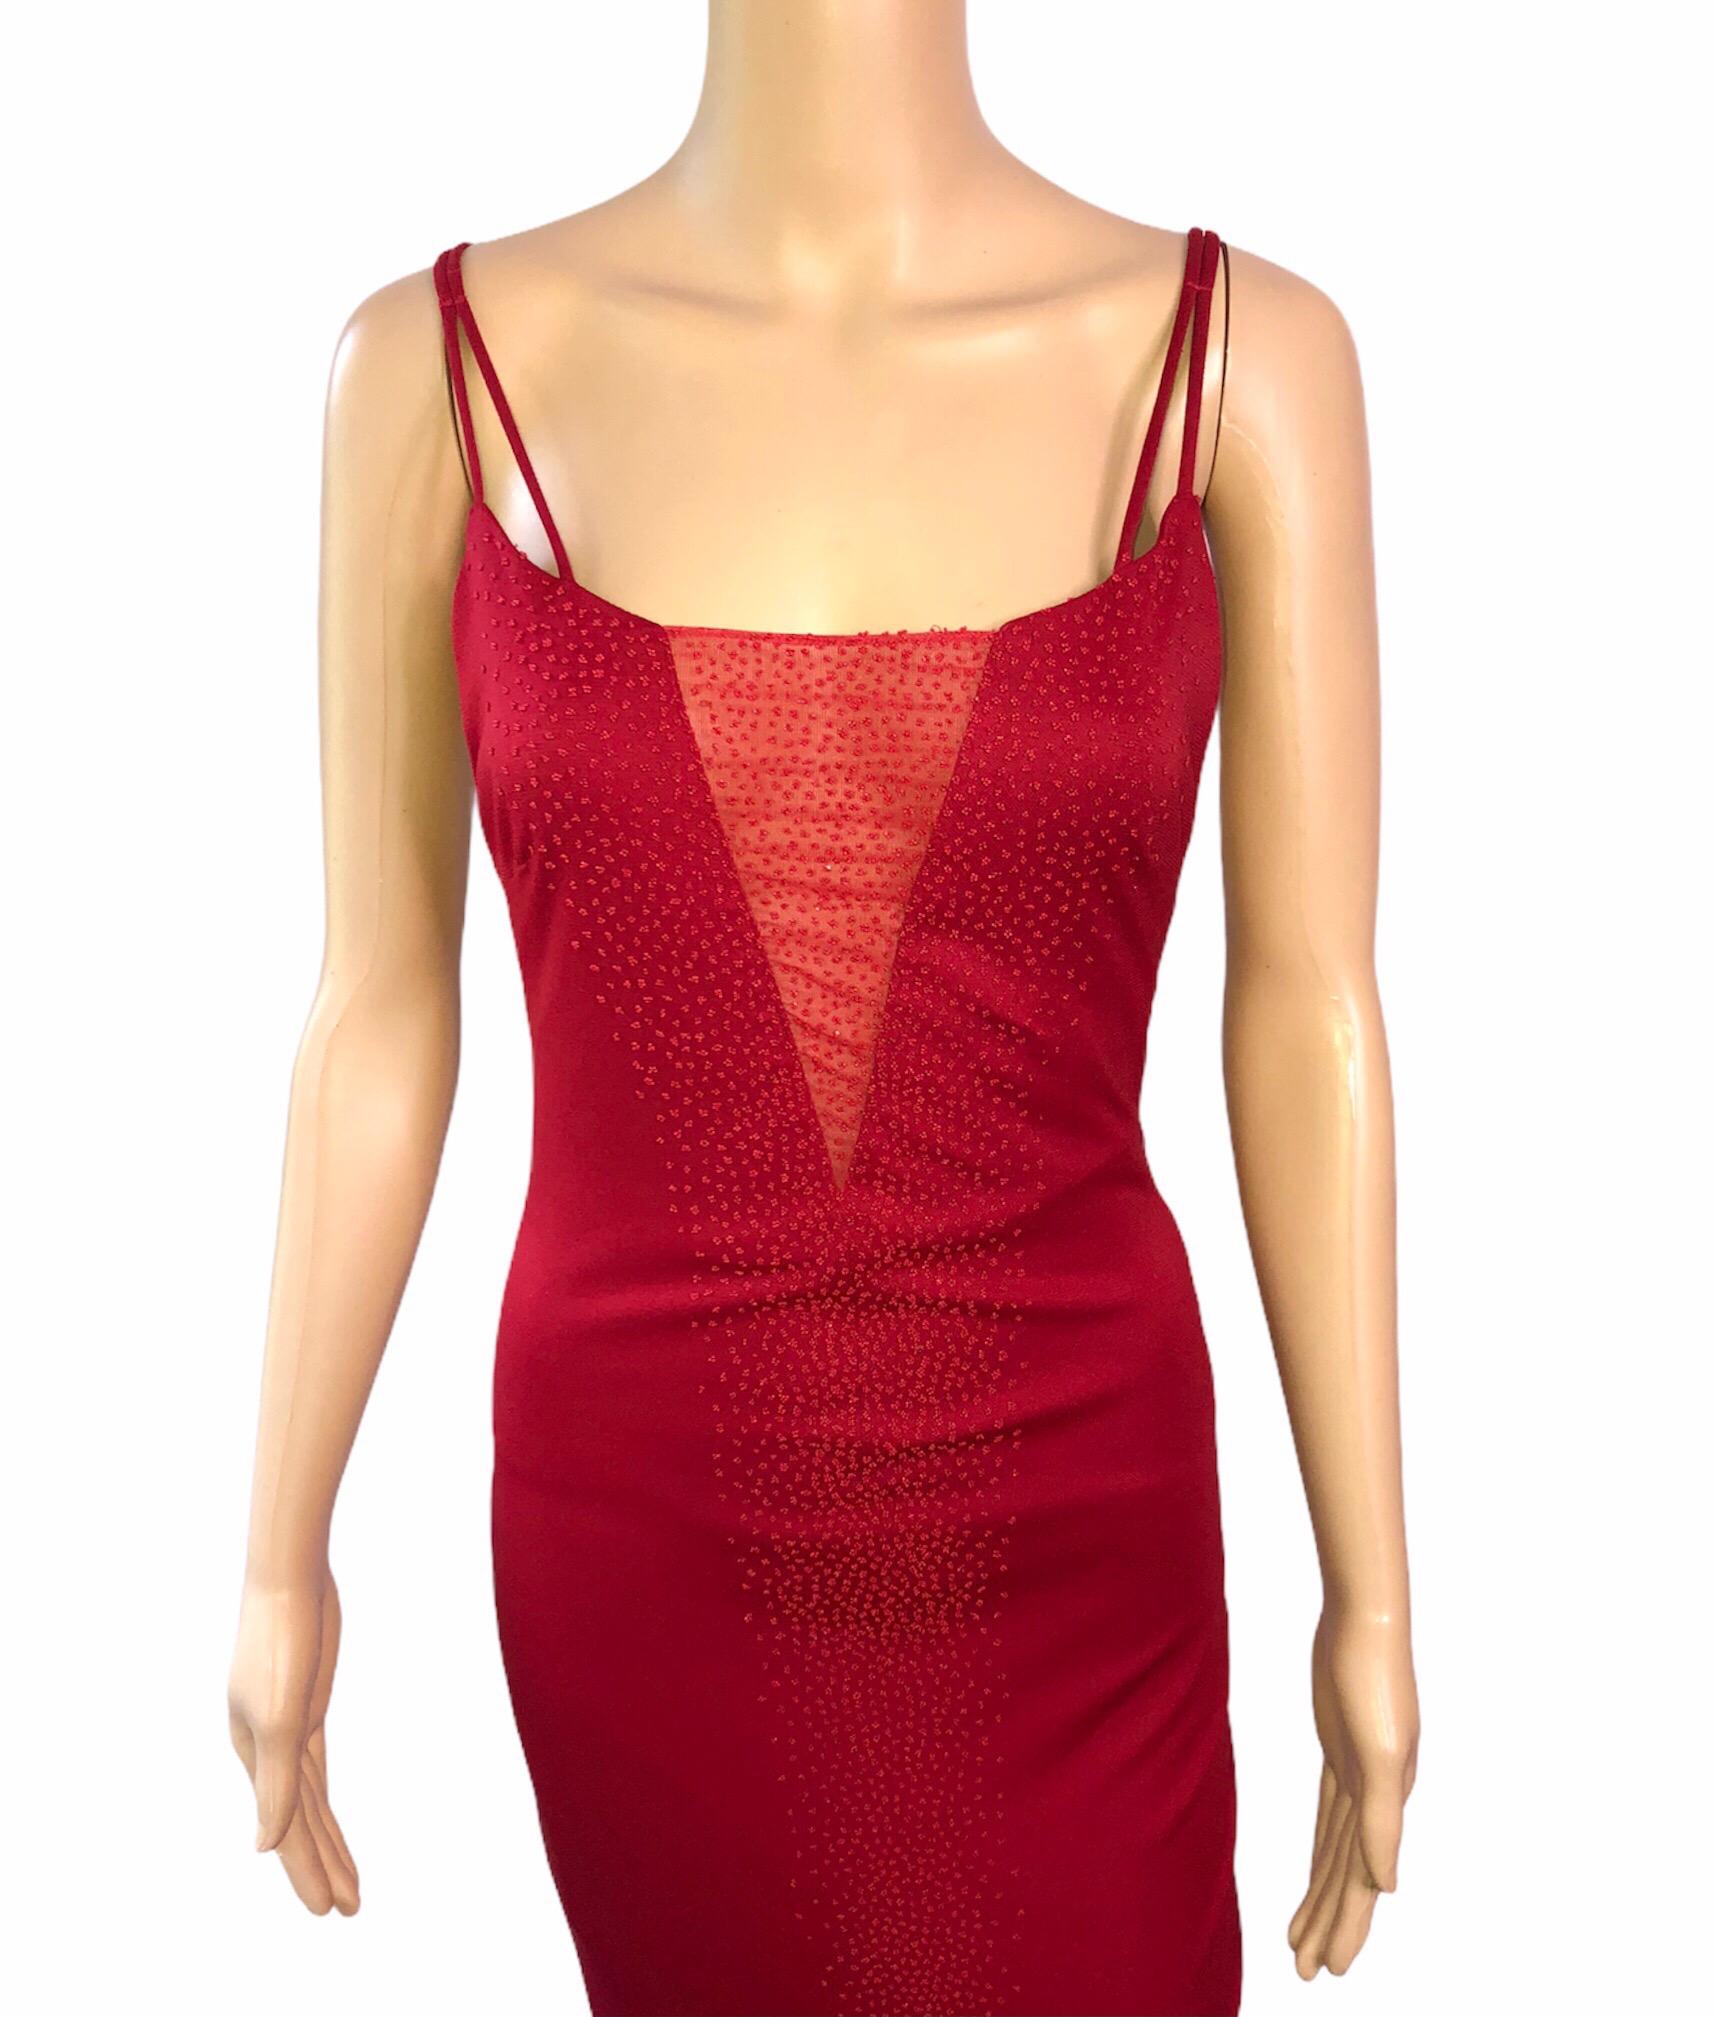 Gianni Versace 1990's Vintage Embellished Sheer Panel Red Evening Dress Gown In Good Condition For Sale In Naples, FL